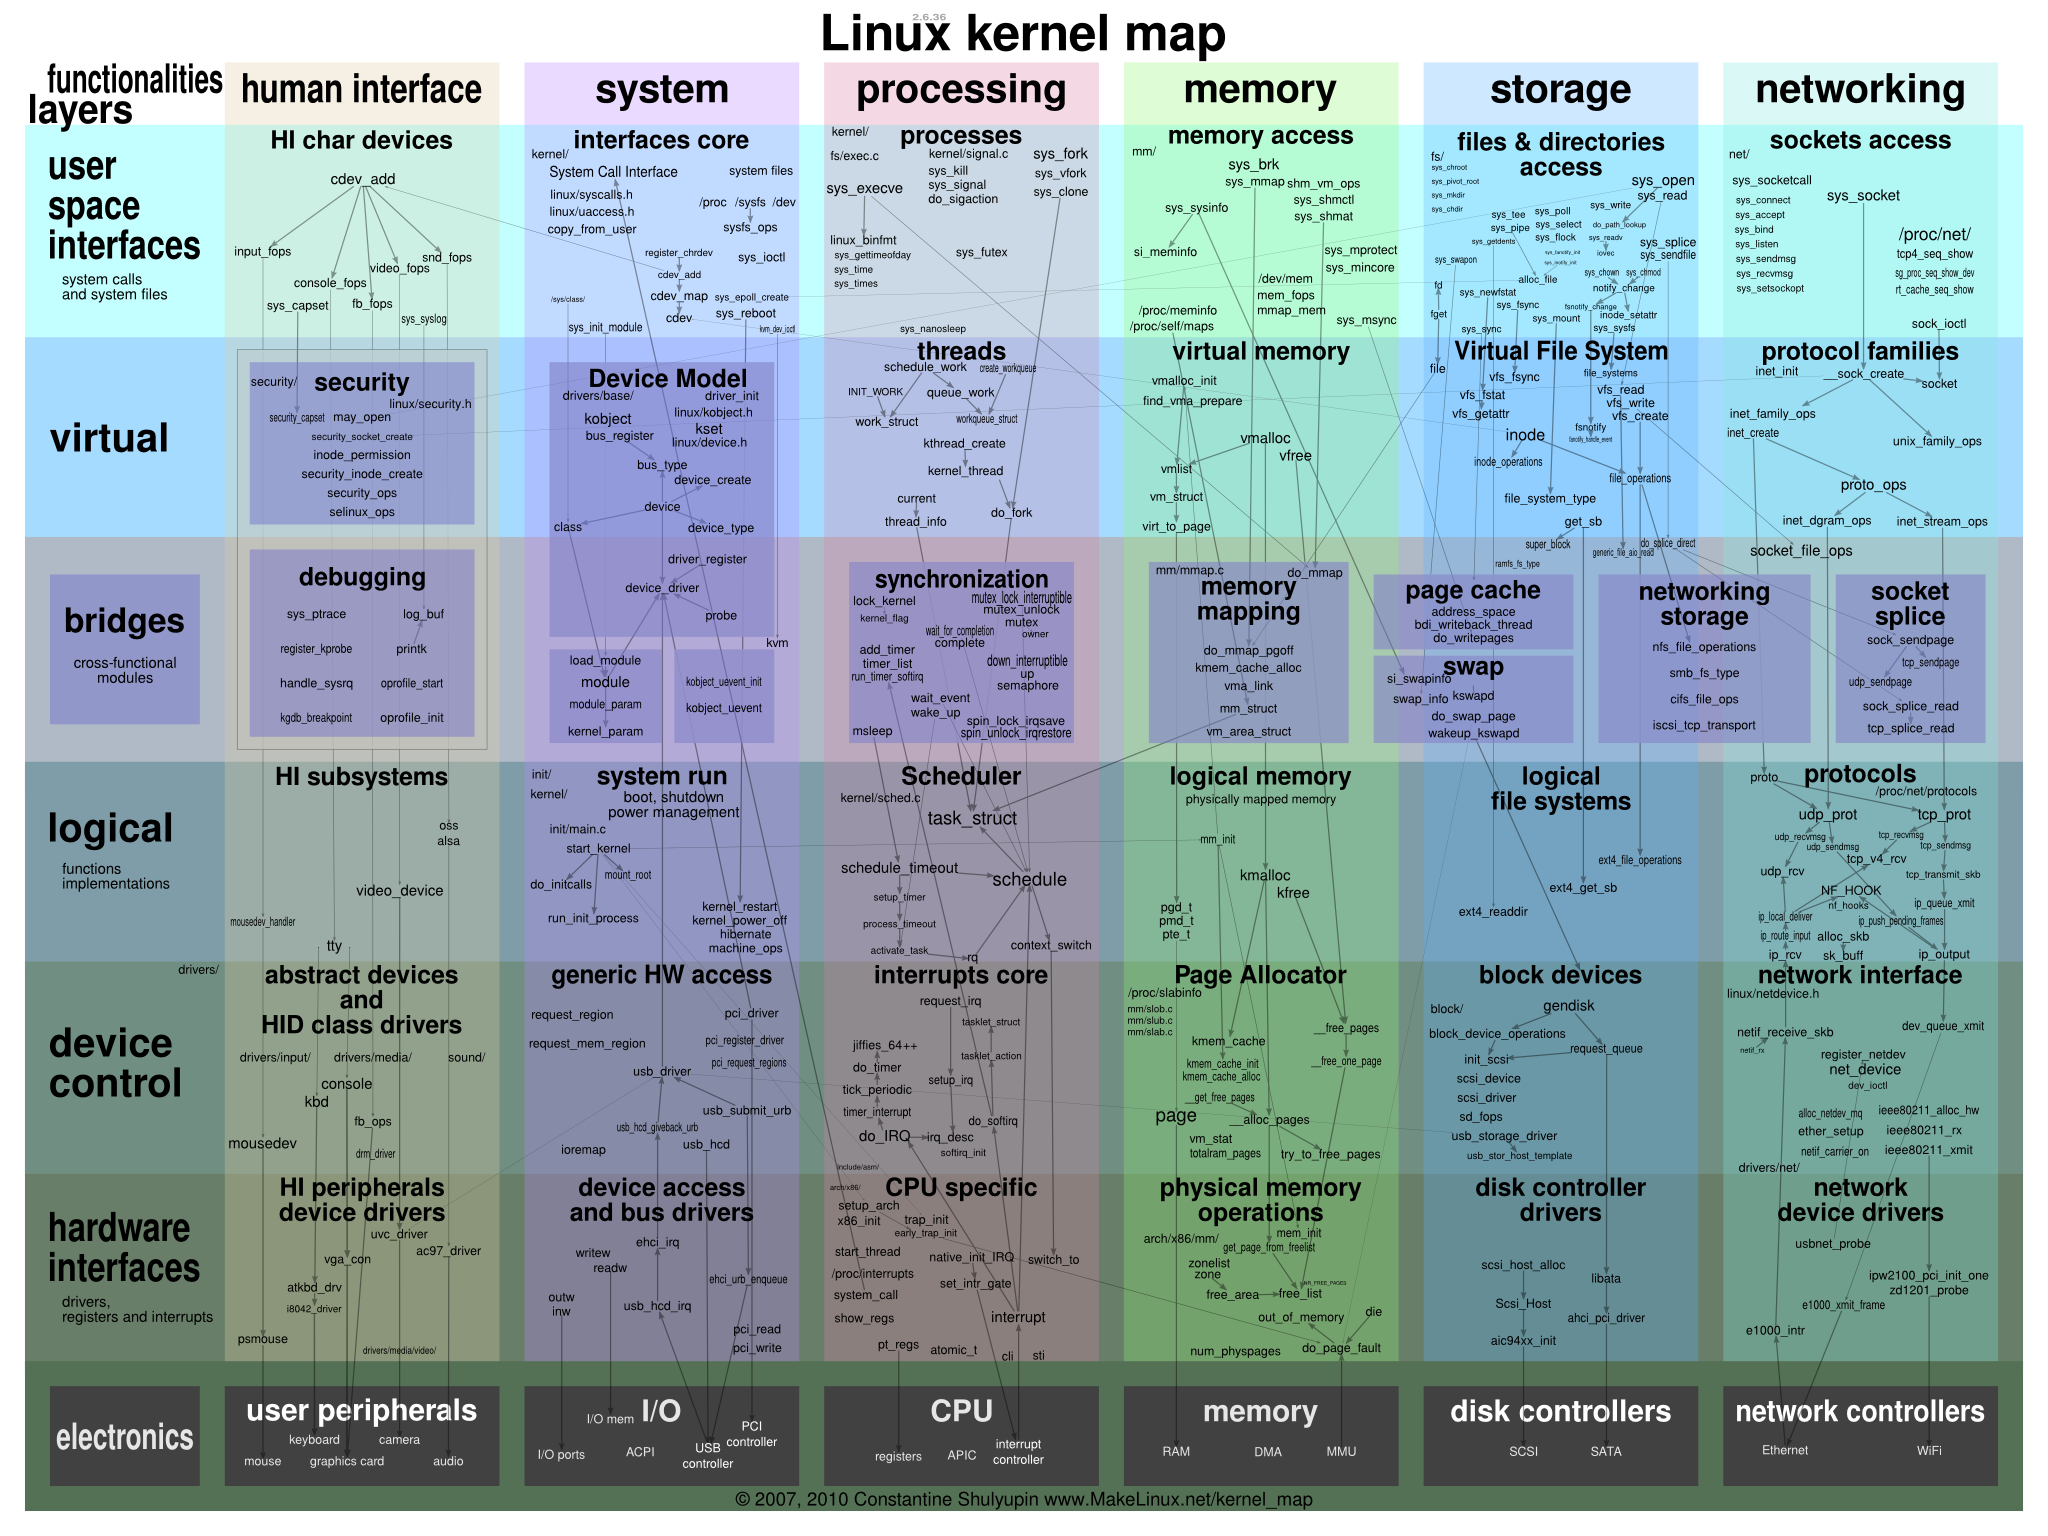 Interactive map of Linux kernel